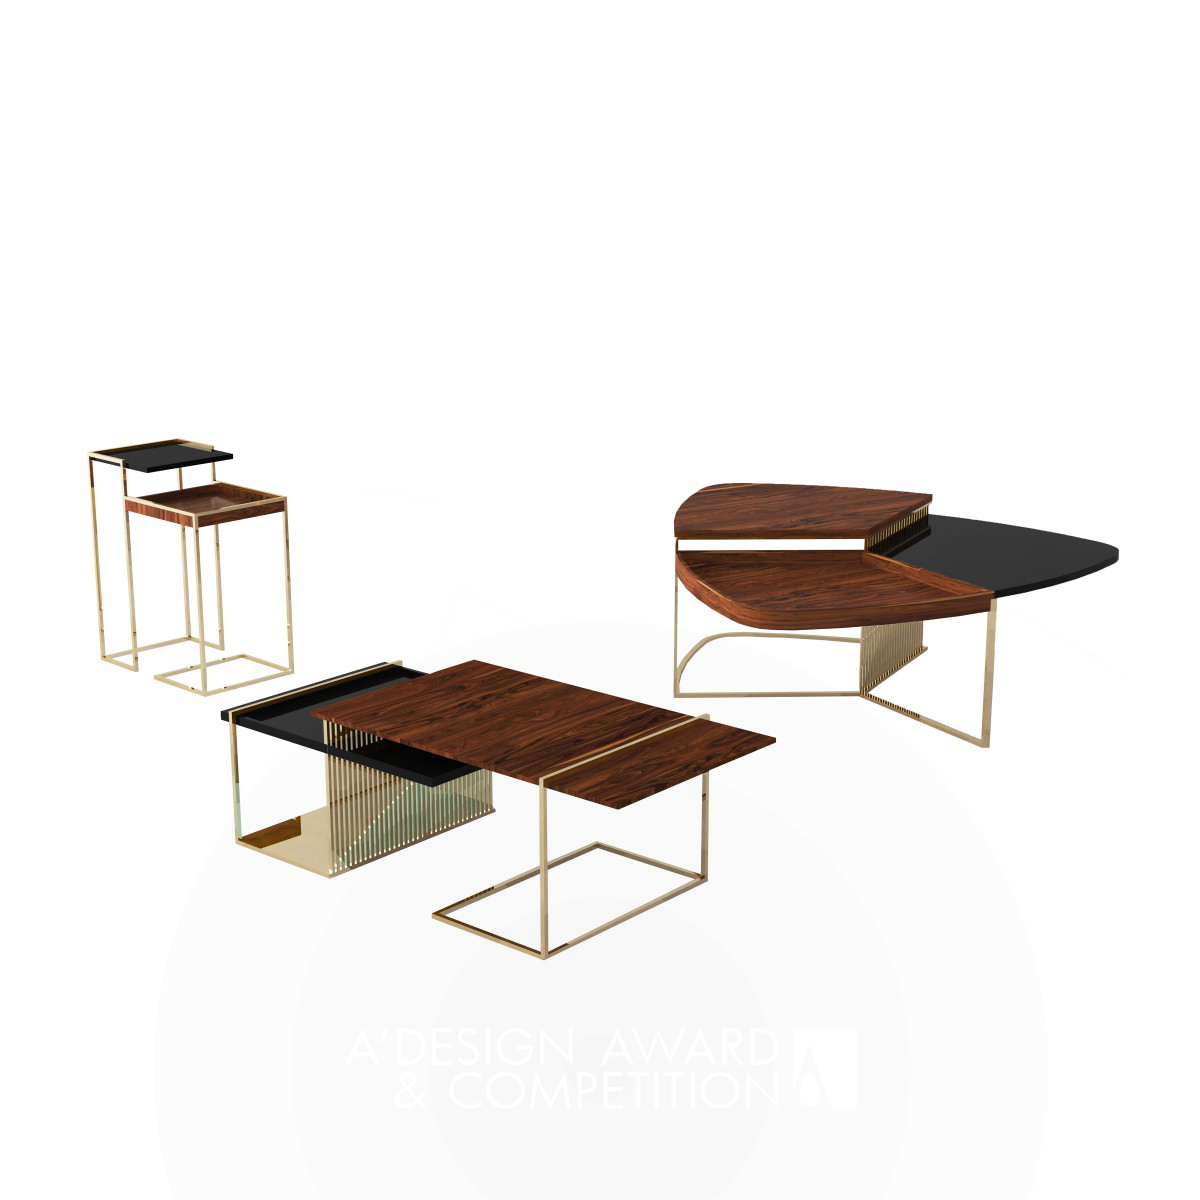 Gignit Coffee and side tables by Spaceroom Design